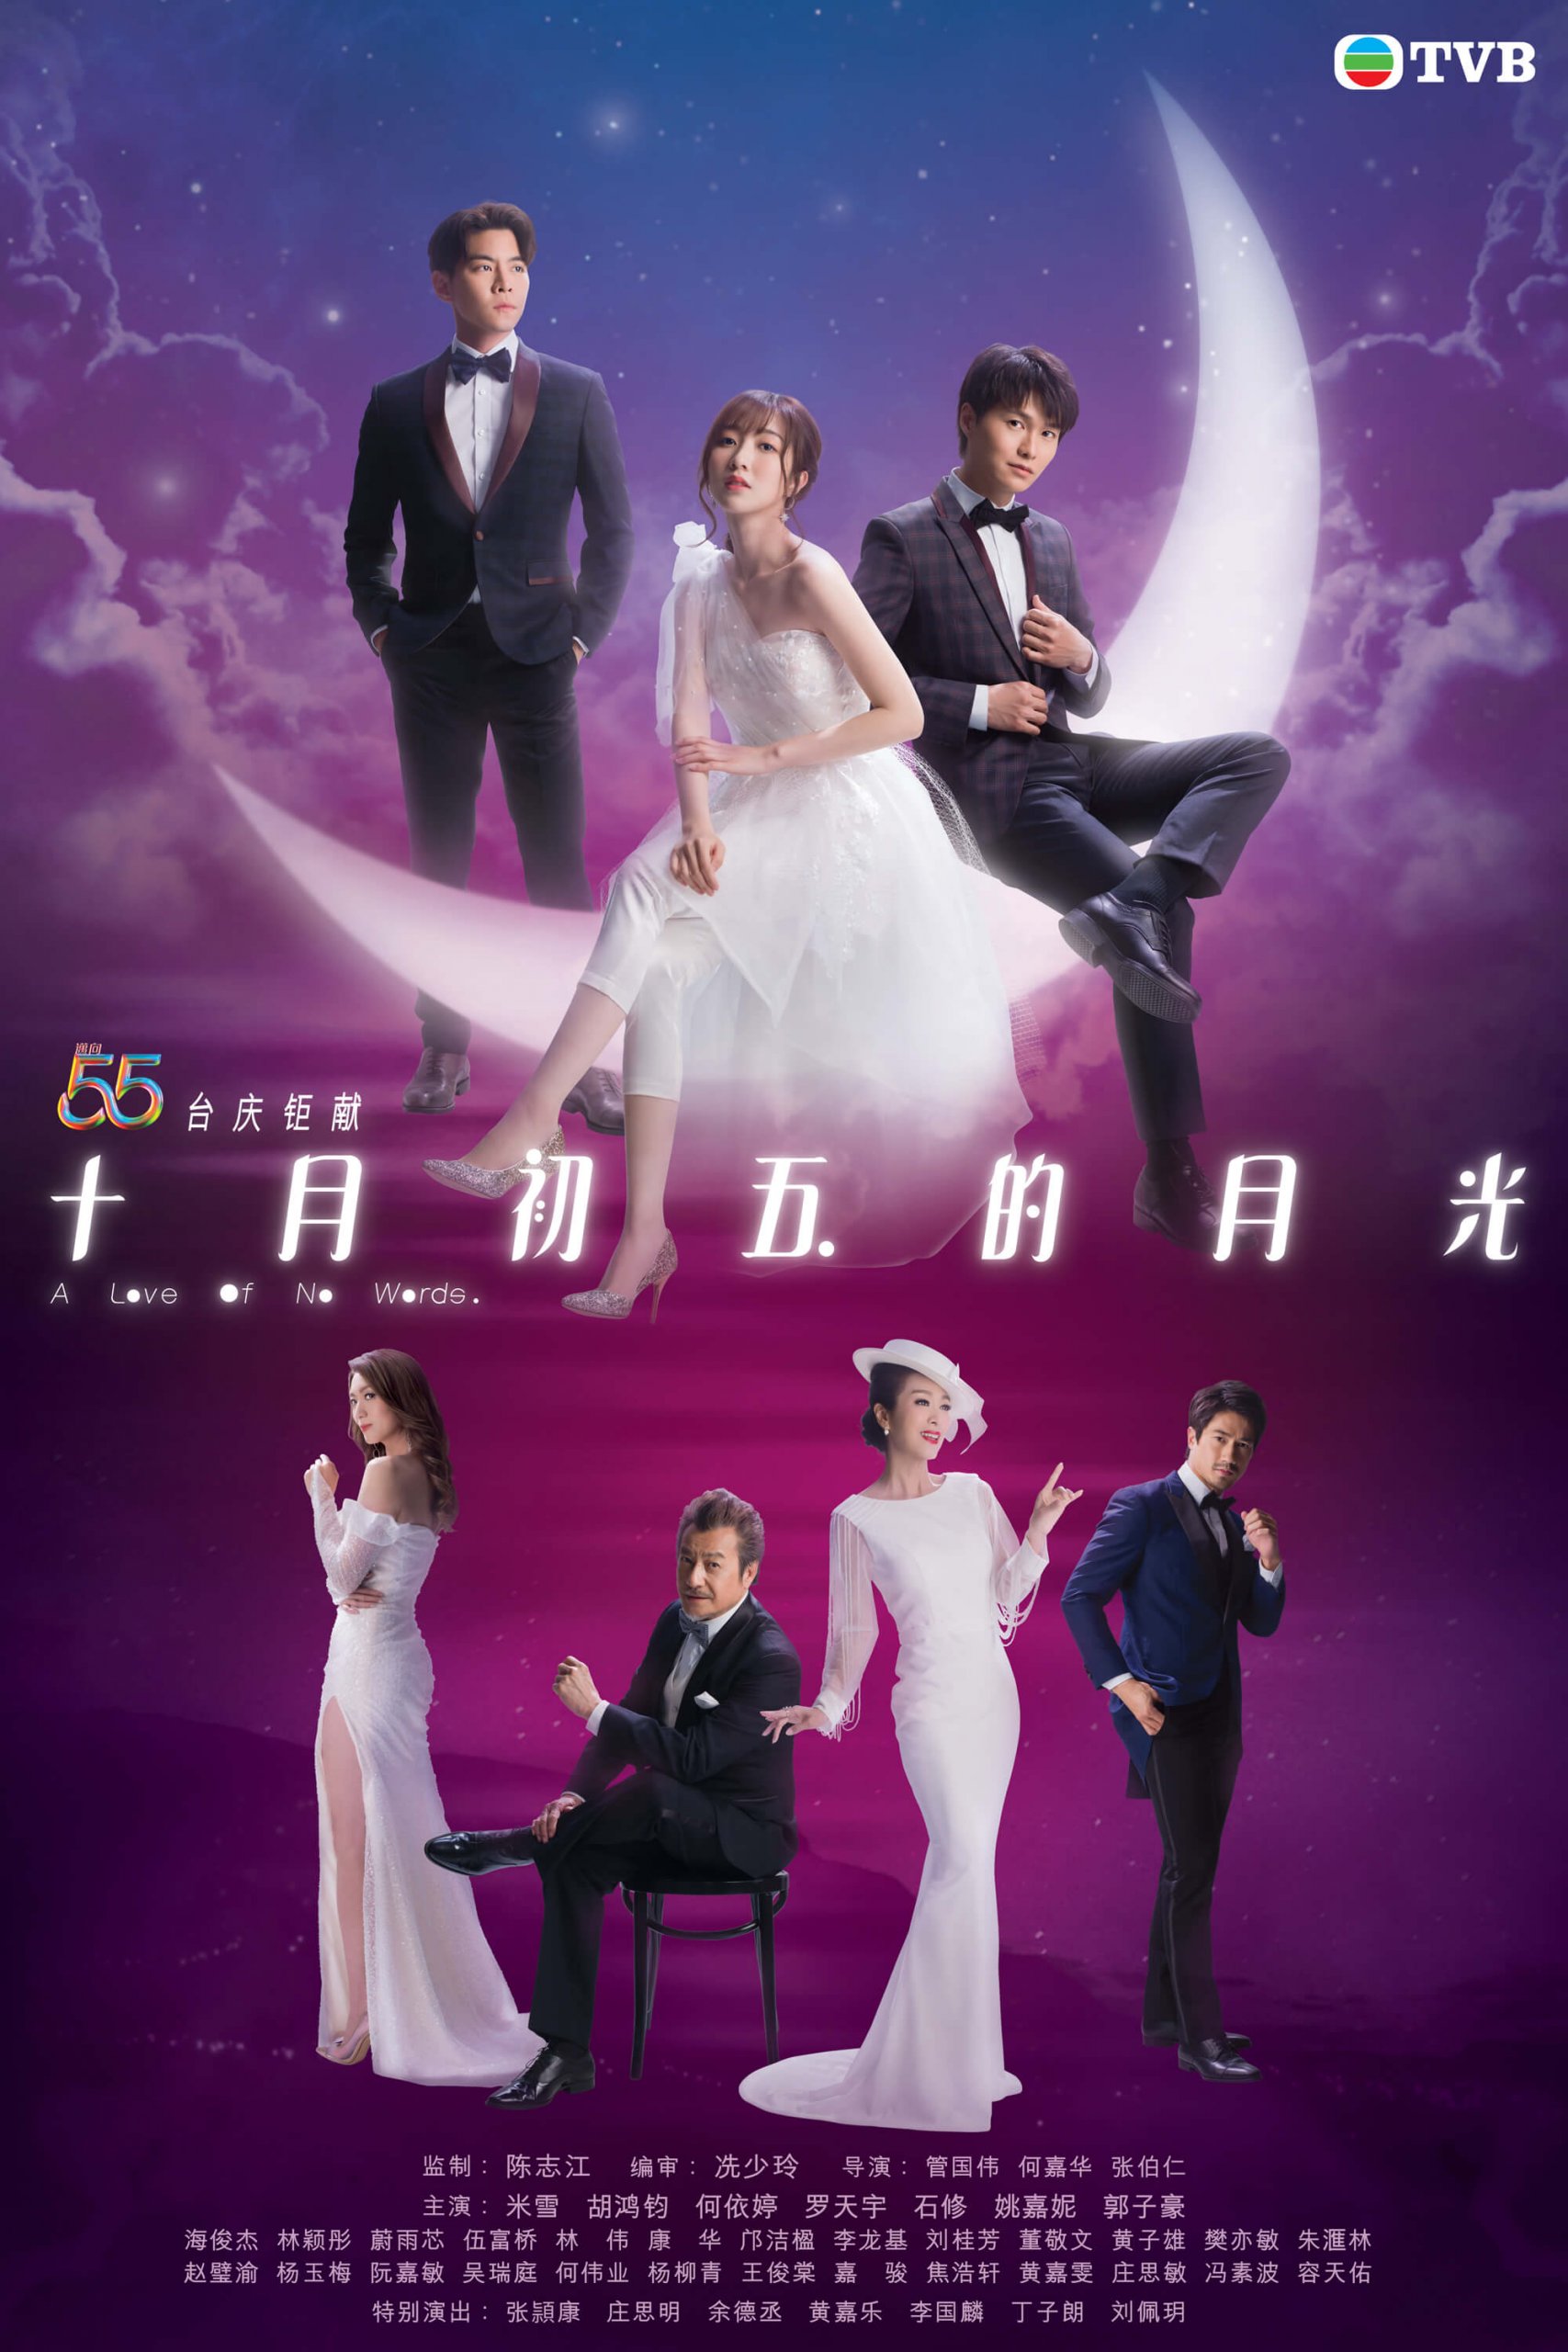 A Love Of No Words (十月初五的月光) - TVB Anywhere